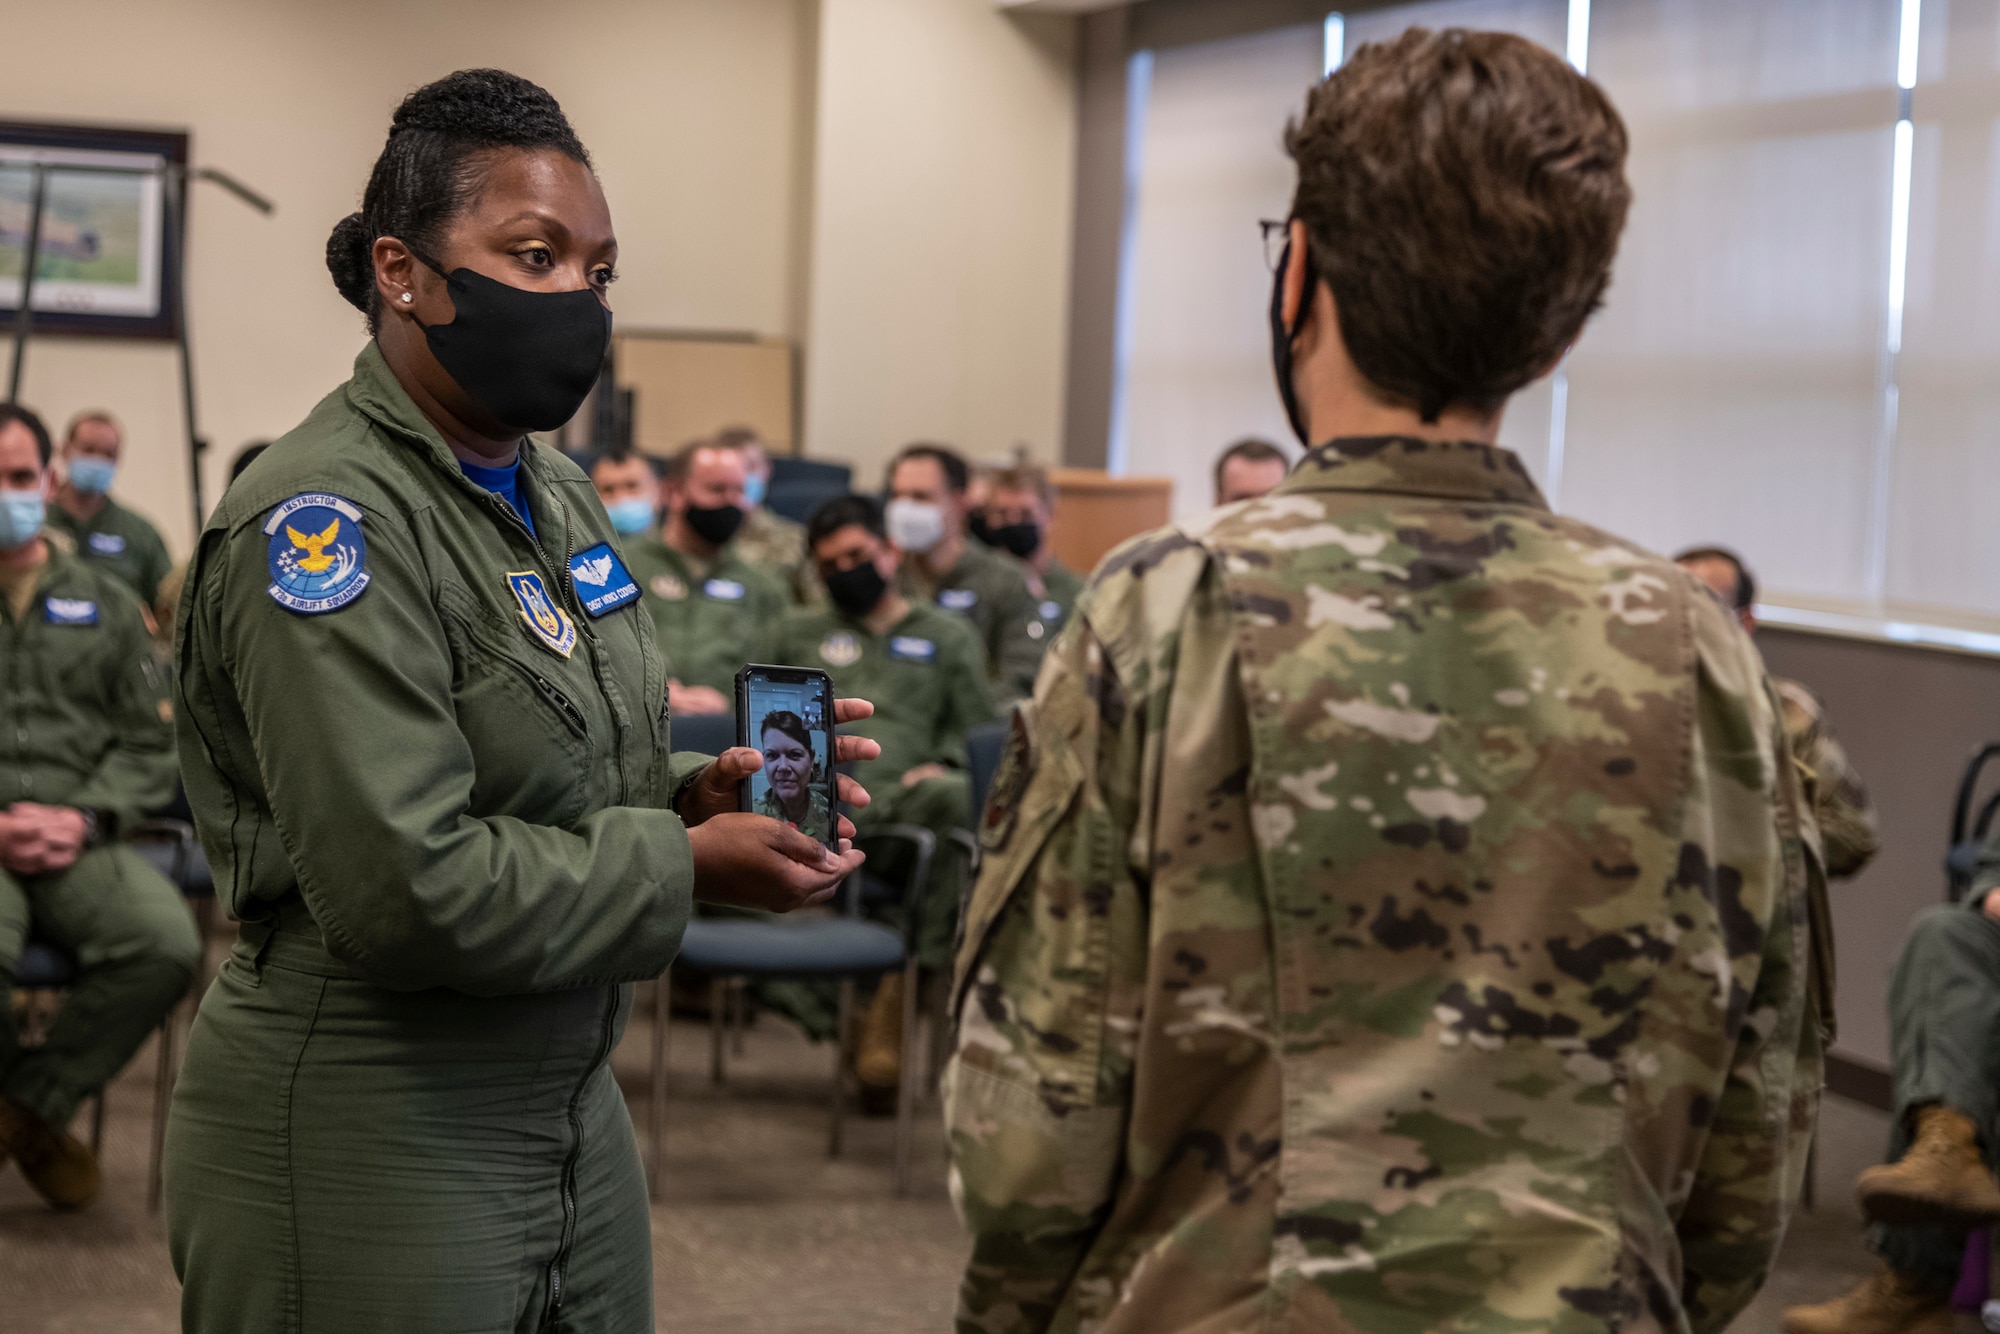 U.S. Air Force Gen. Jacqueline Van Ovost, Air Mobility Command commander, recognizes Tech. Sgt. Ginger Stewart, 73 Airlift Squadron, flight attendant, as a star performer from the 932nd Airlift Wing, on April 10, 2021. Chief Master Sgt. Monica Codner, 73 Airlift Squadron, superintendent, nominated Stewart for her outstanding work. (U.S. Air Force photo by Senior Airman Brooke Spenner)